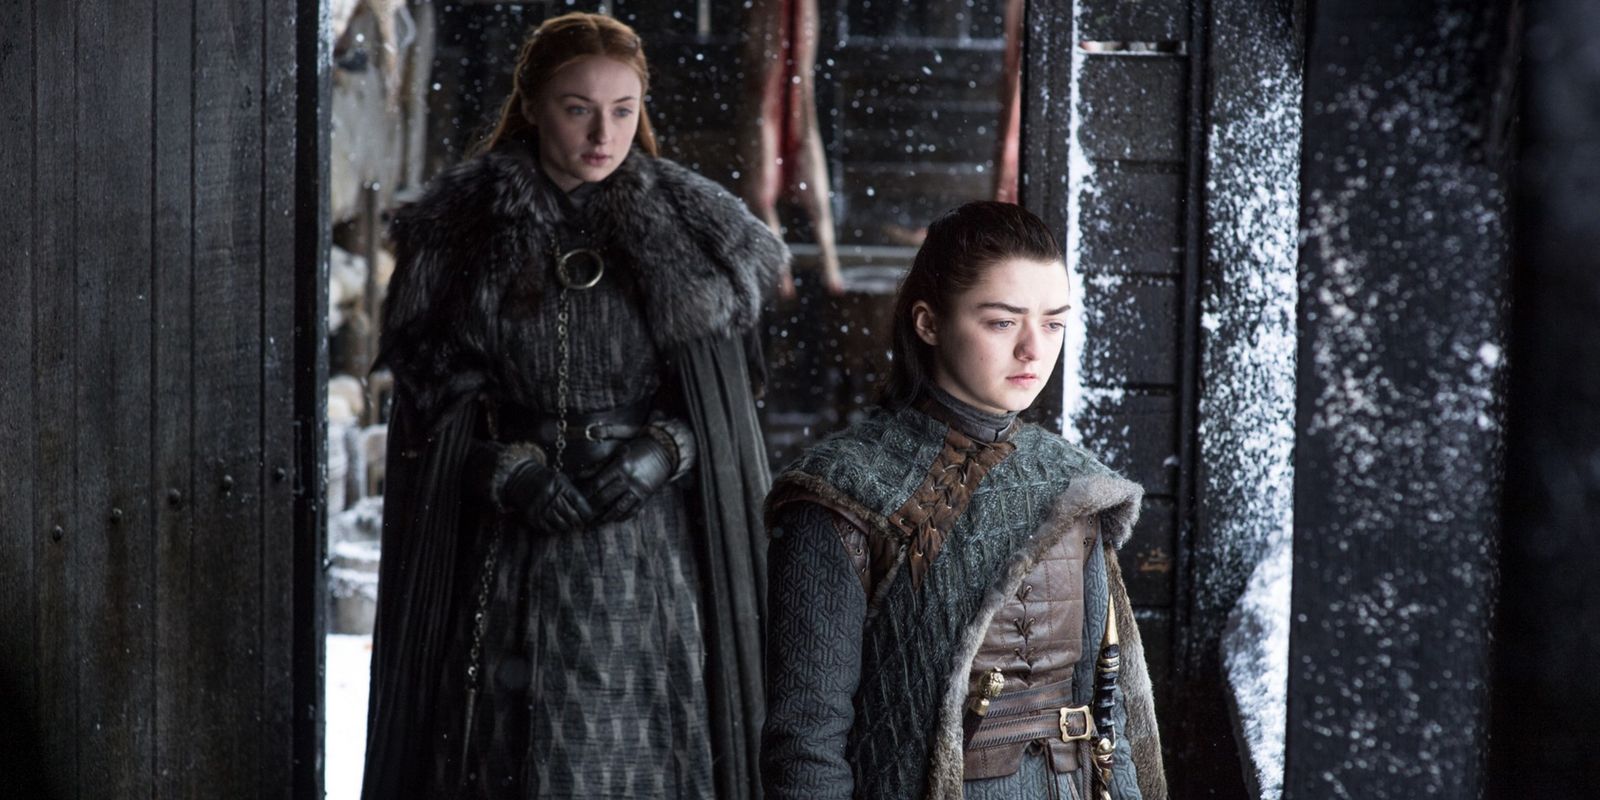 Sophie Turner and Maisie Williams in Game of Thrones Season 7 Episode 6